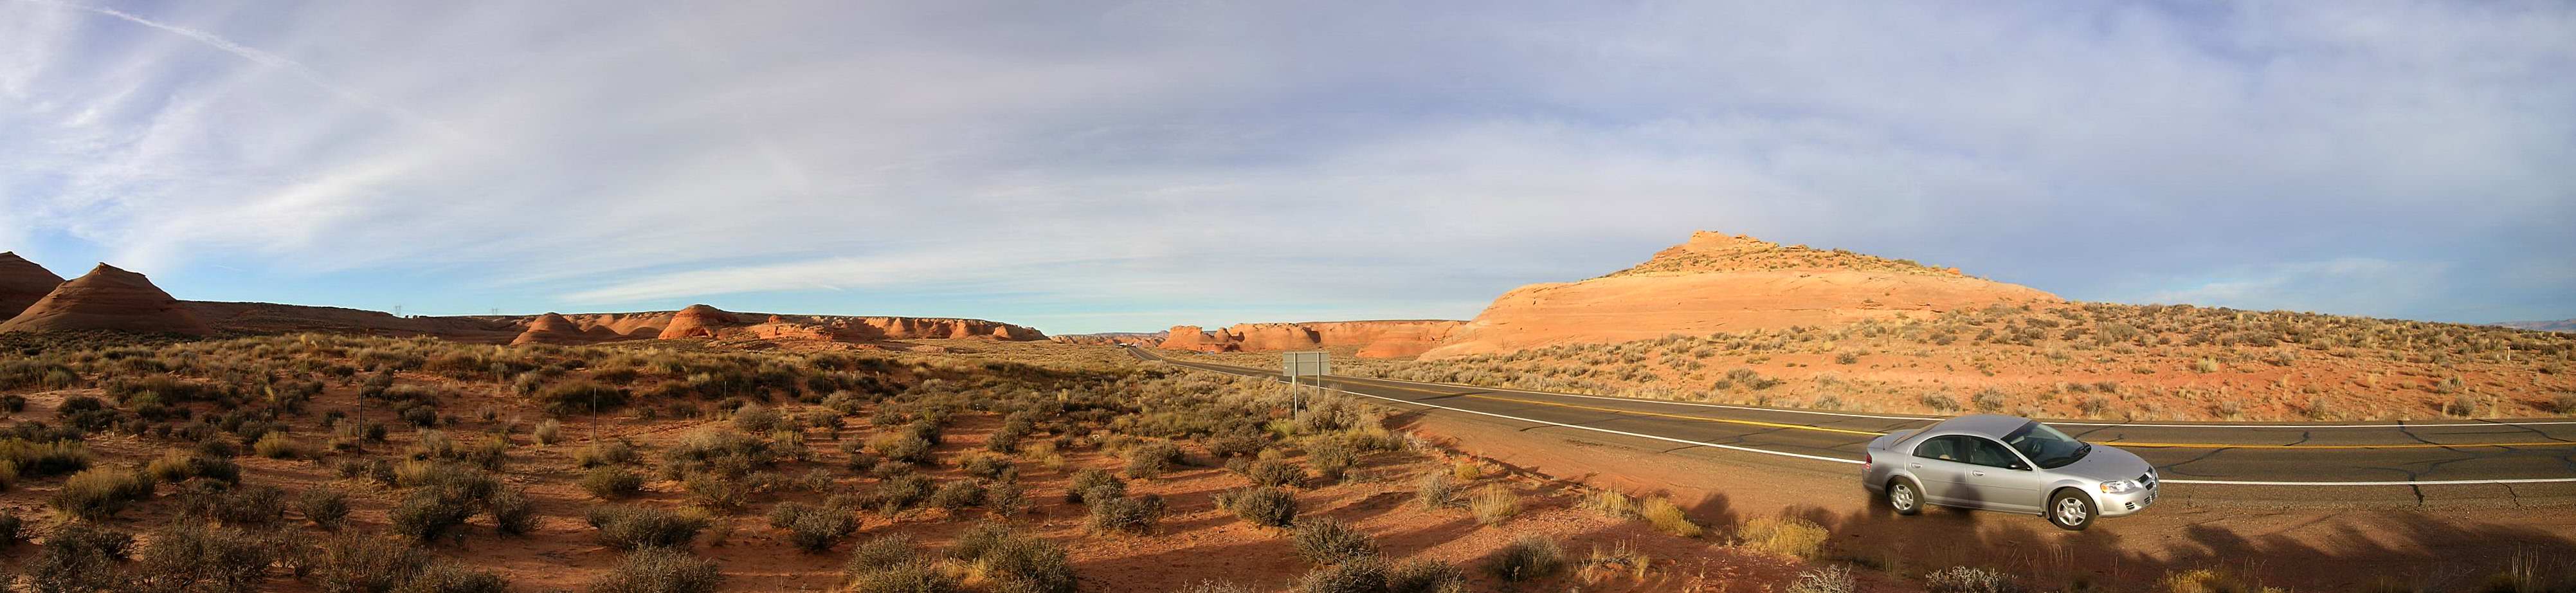 Car and hill on the way to Monument Valley - 27th